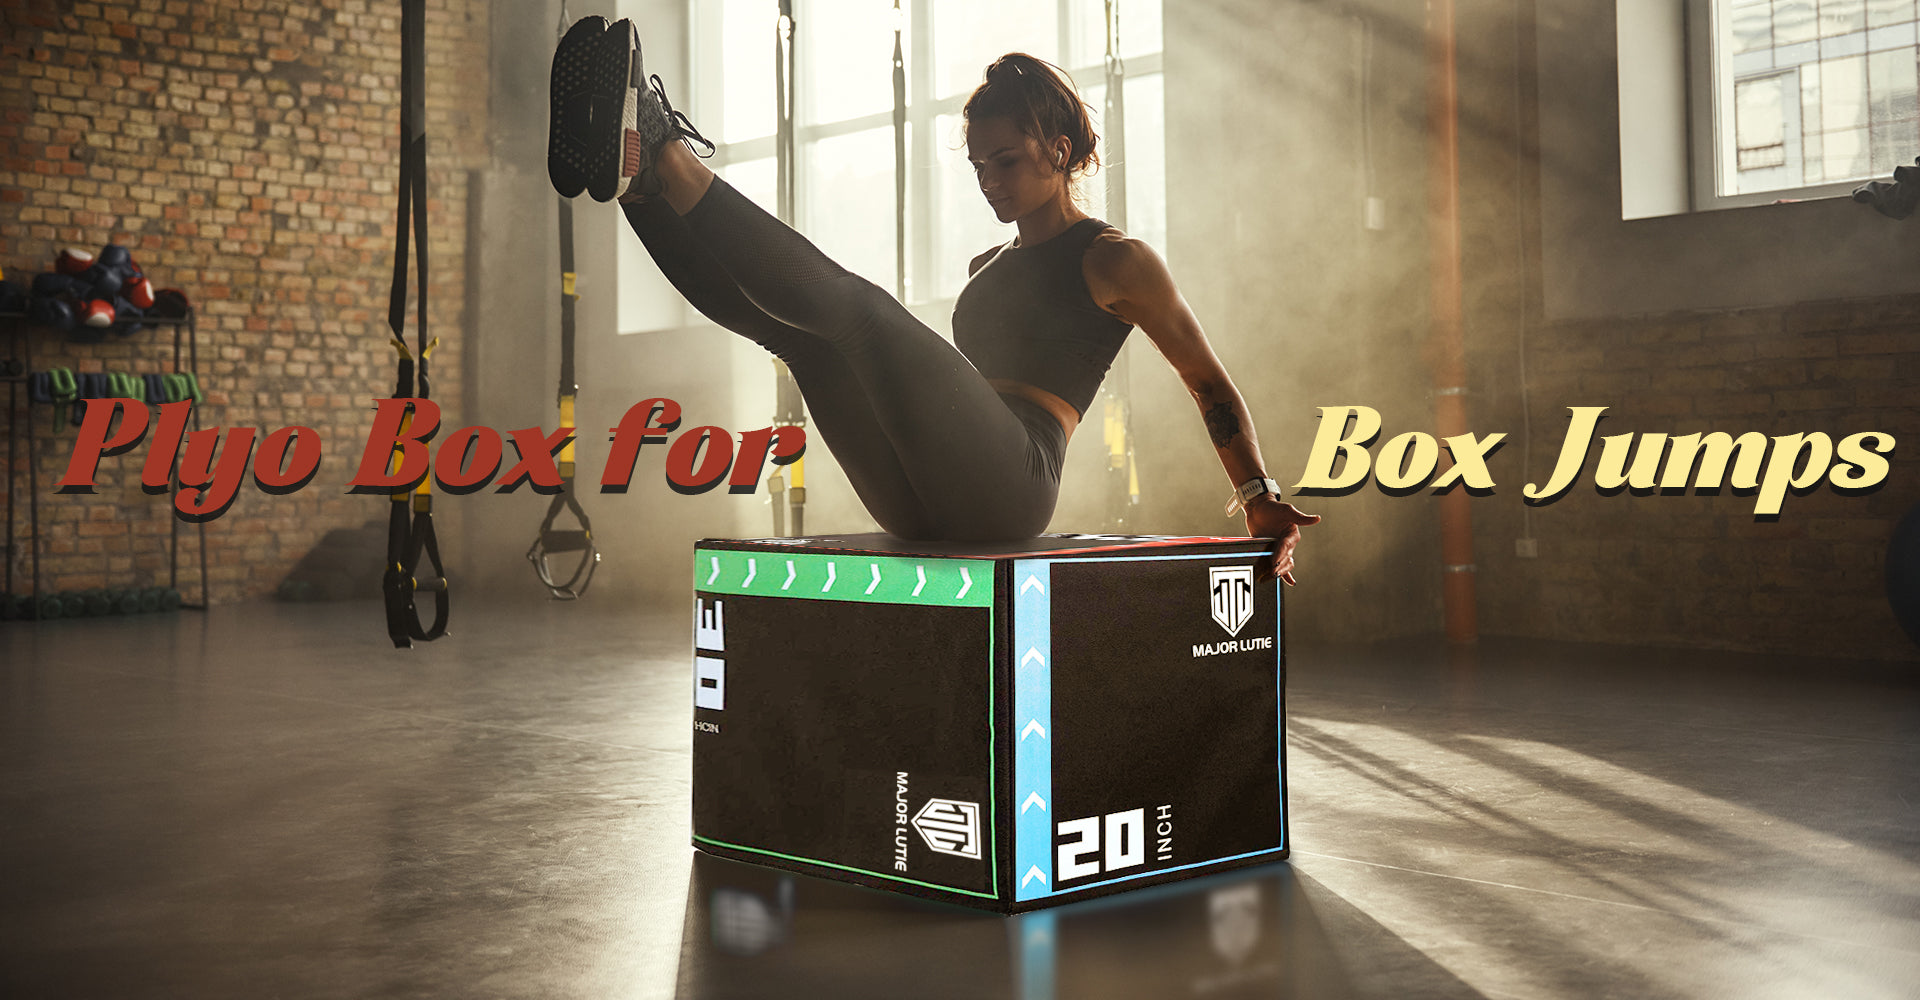 The Guide of Plyo Box for Box Jumps